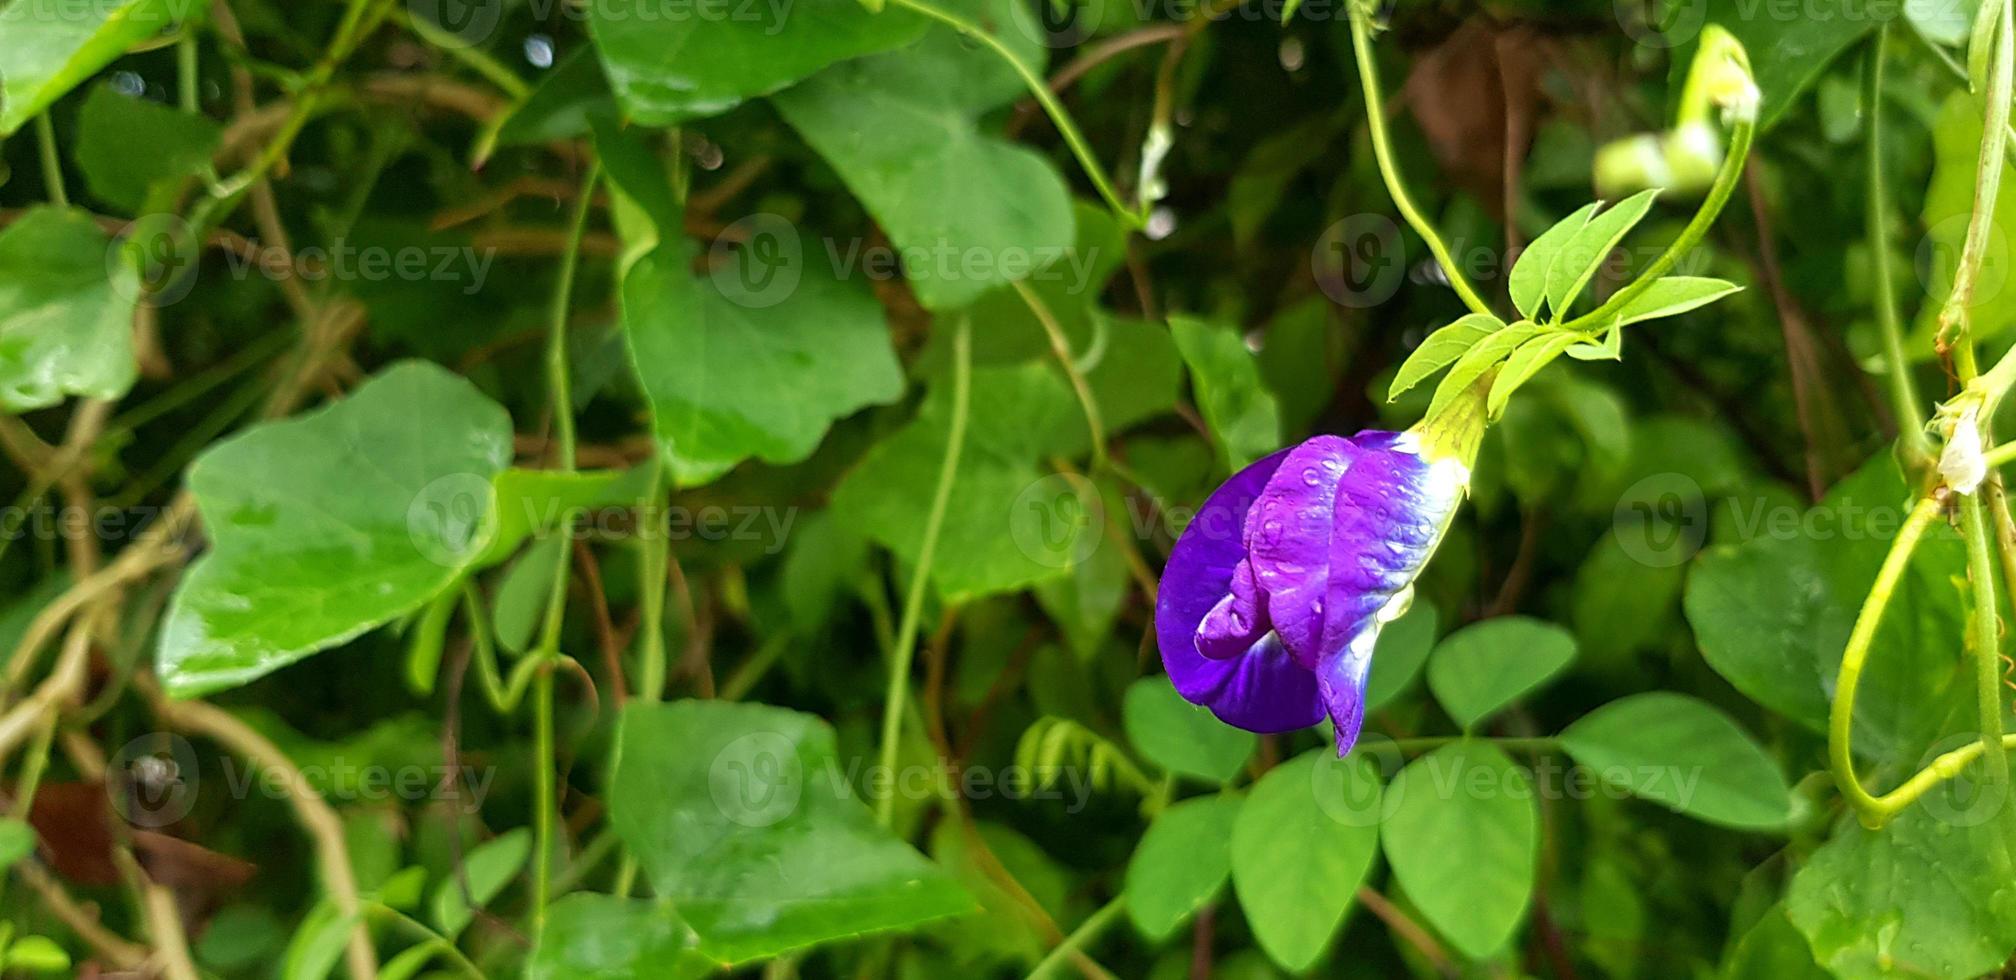 Freshness blue, purple or pea flower with green leaves blurred background and copy space. Herb, Food, Herbal and Beauty of Nature. Scientific name of flower is Clitoria ternatea L photo